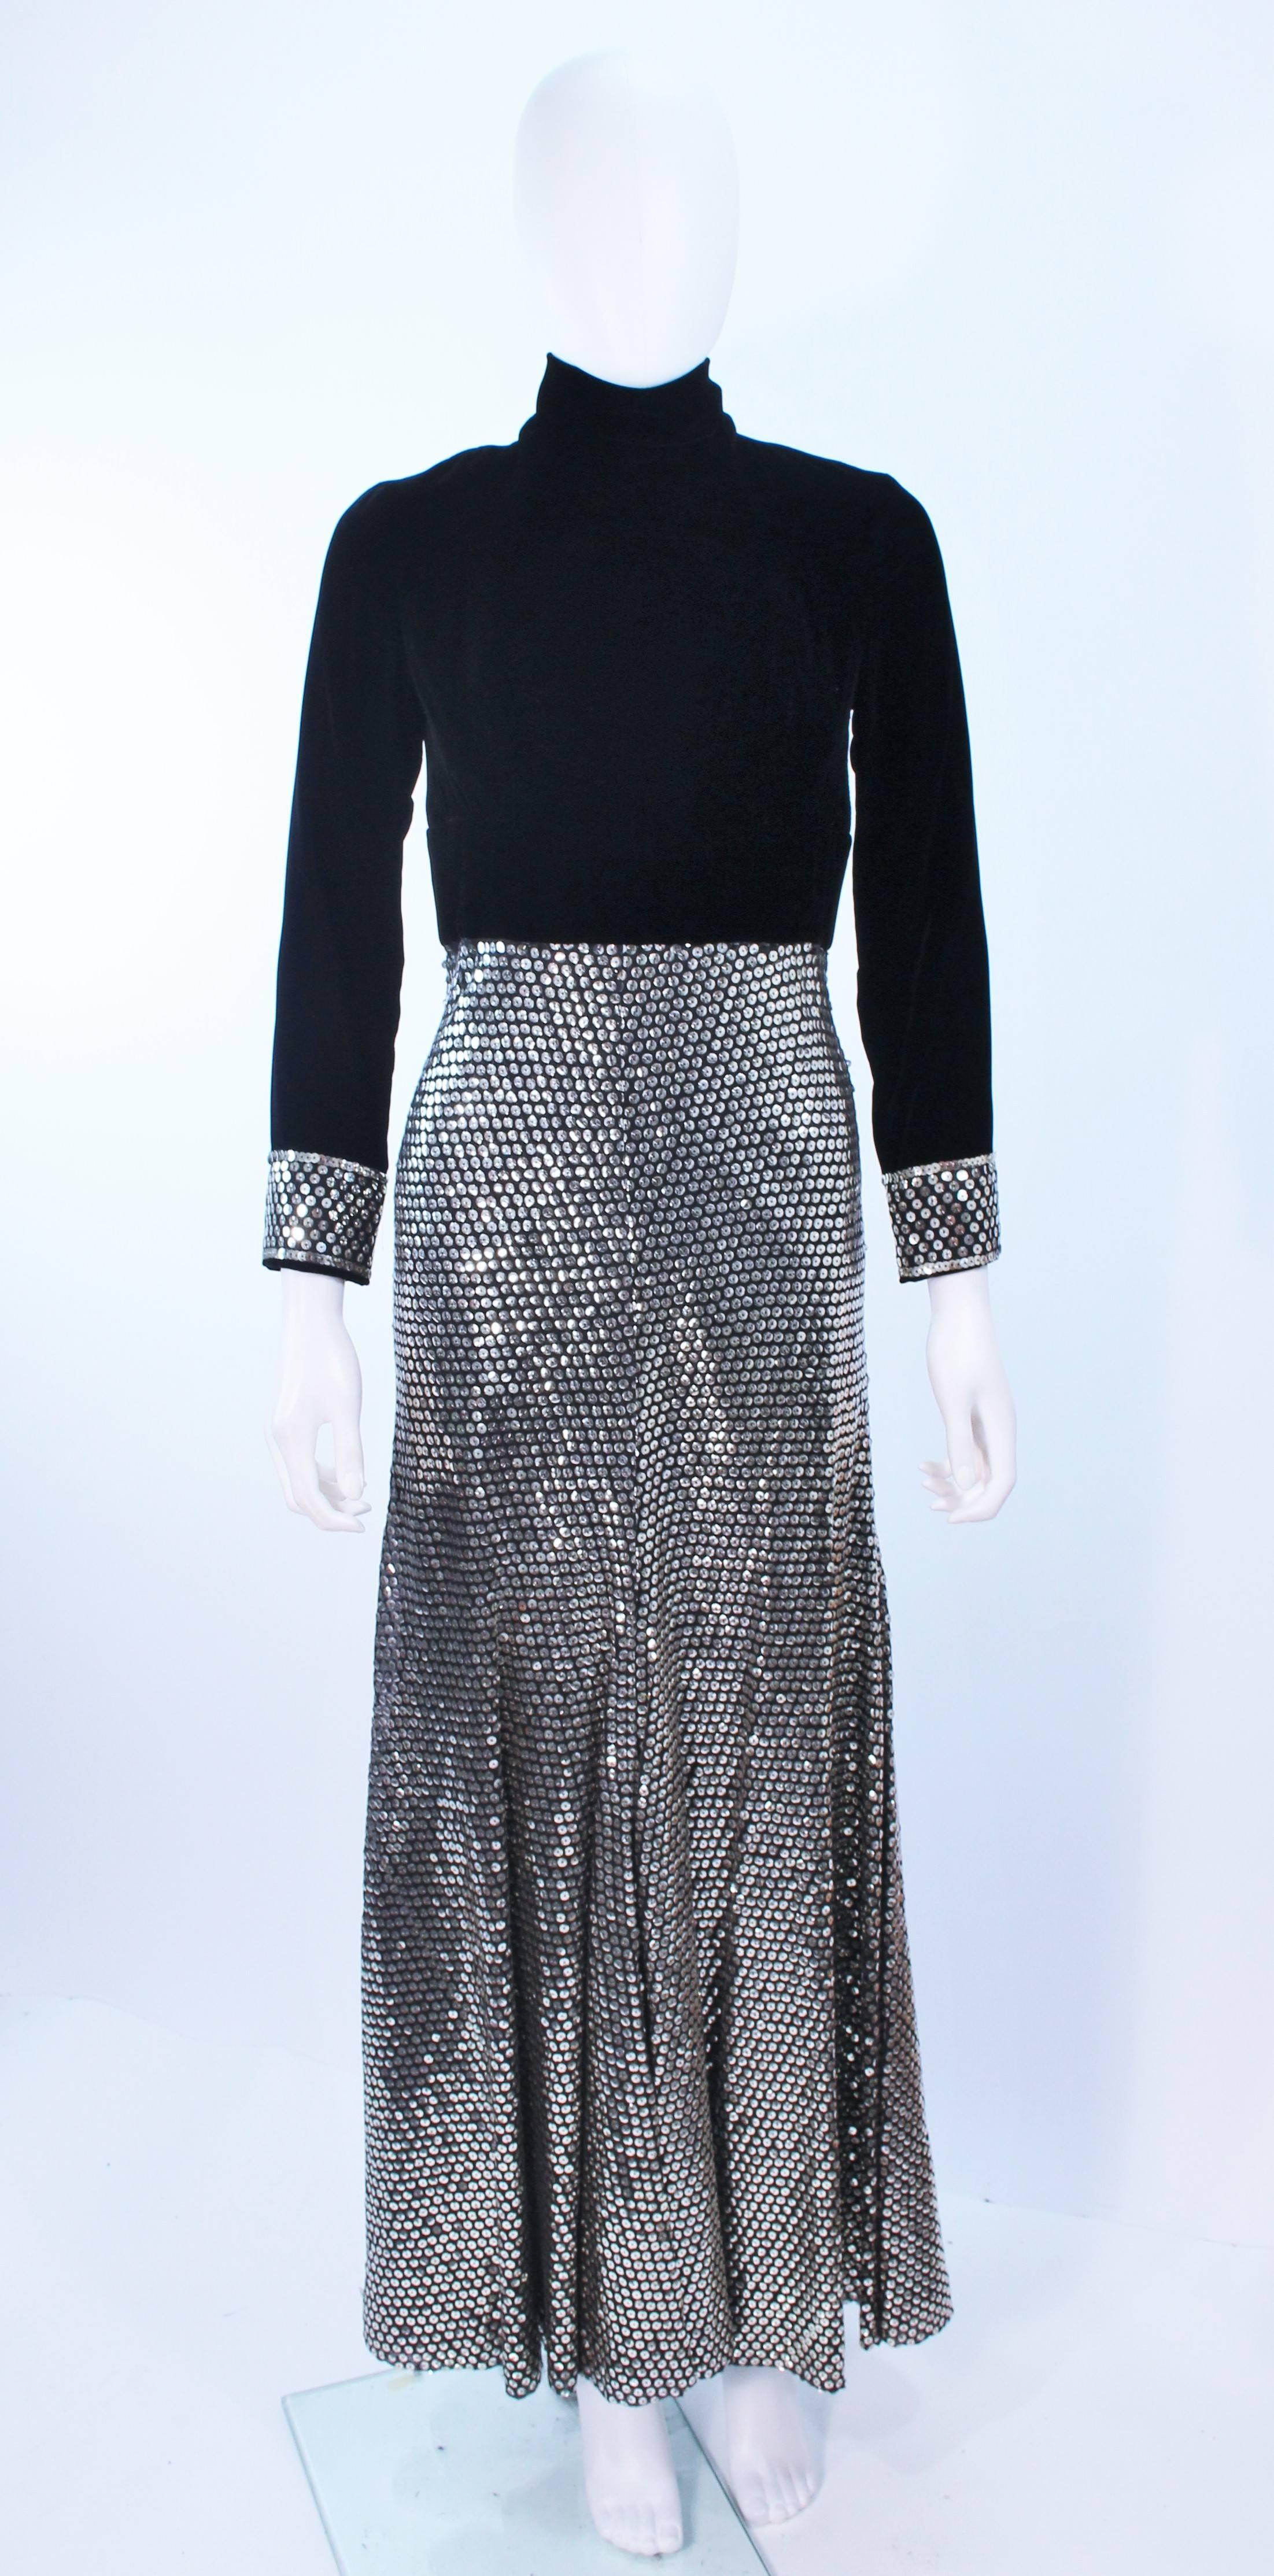 This vintage gown is composed of black velvet and features sequin accents. There is a center back zipper closure with button details, and a mockneck. In excellent vintage condition.

**Please cross-reference measurements for personal accuracy.